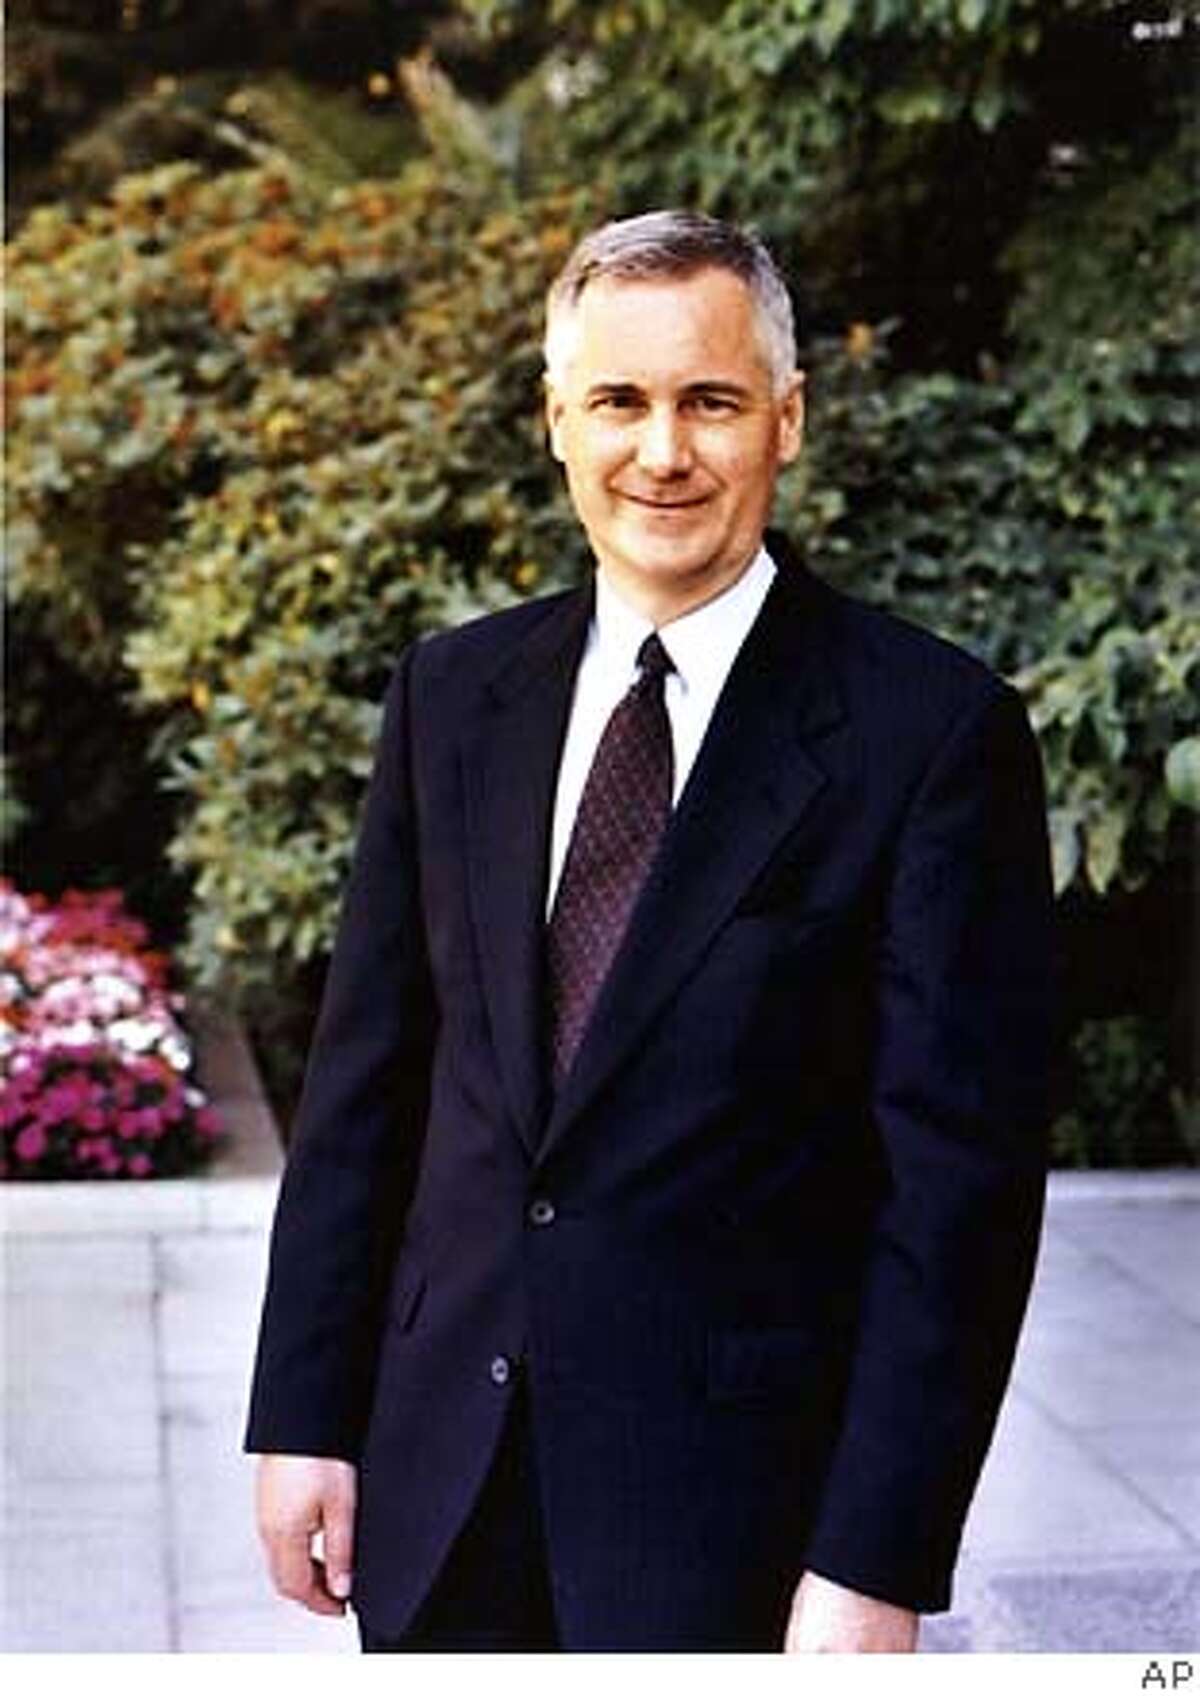 ** ADVANCE FOR USE ANYTIME ** State Sen. Tom McClintock, R-Northridge, seen in undate photo, is running unopposed for the Republican nomination for lieutenant governor in the June primary. McClintock will face the winner of the Democratic primary, either state Sen. Jackie Speier, D-Daly City, state Sen. Liz Figueroa, of Sunol, or Insurance Commissioner John Garamendi. (AP Photo/McClintock for Lieutenant Governor) ** ** Ran on: 05-26-2006 Ran on: 05-28-2006 Ran on: 06-07-2006 Ran on: 10-18-2006 ALSO Ran on: 10-24-2006 Ran on: 10-25-2006 John Garamendi ALSO Ran on: 10-25-2006 ALSO Ran on: 10-29-2006 ALSO Ran on: 11-04-2006 John Garamendi John Garamendi Ran on: 11-08-2006 Democrat John Garamendi (right) chats with Rep. Doris Matsui, D-Sacramento, in Sacramento. Ran on: 11-08-2006 Democrat John Garamendi (right) chats with Rep. Doris Matsui, D-Sacramento, in Sacramento. ADVANCE FOR USE ANYTIME, UNDATED PHOTO PROVIDED BY MCCLINTOCK FOR LIEUTENANT GOVERNOR,